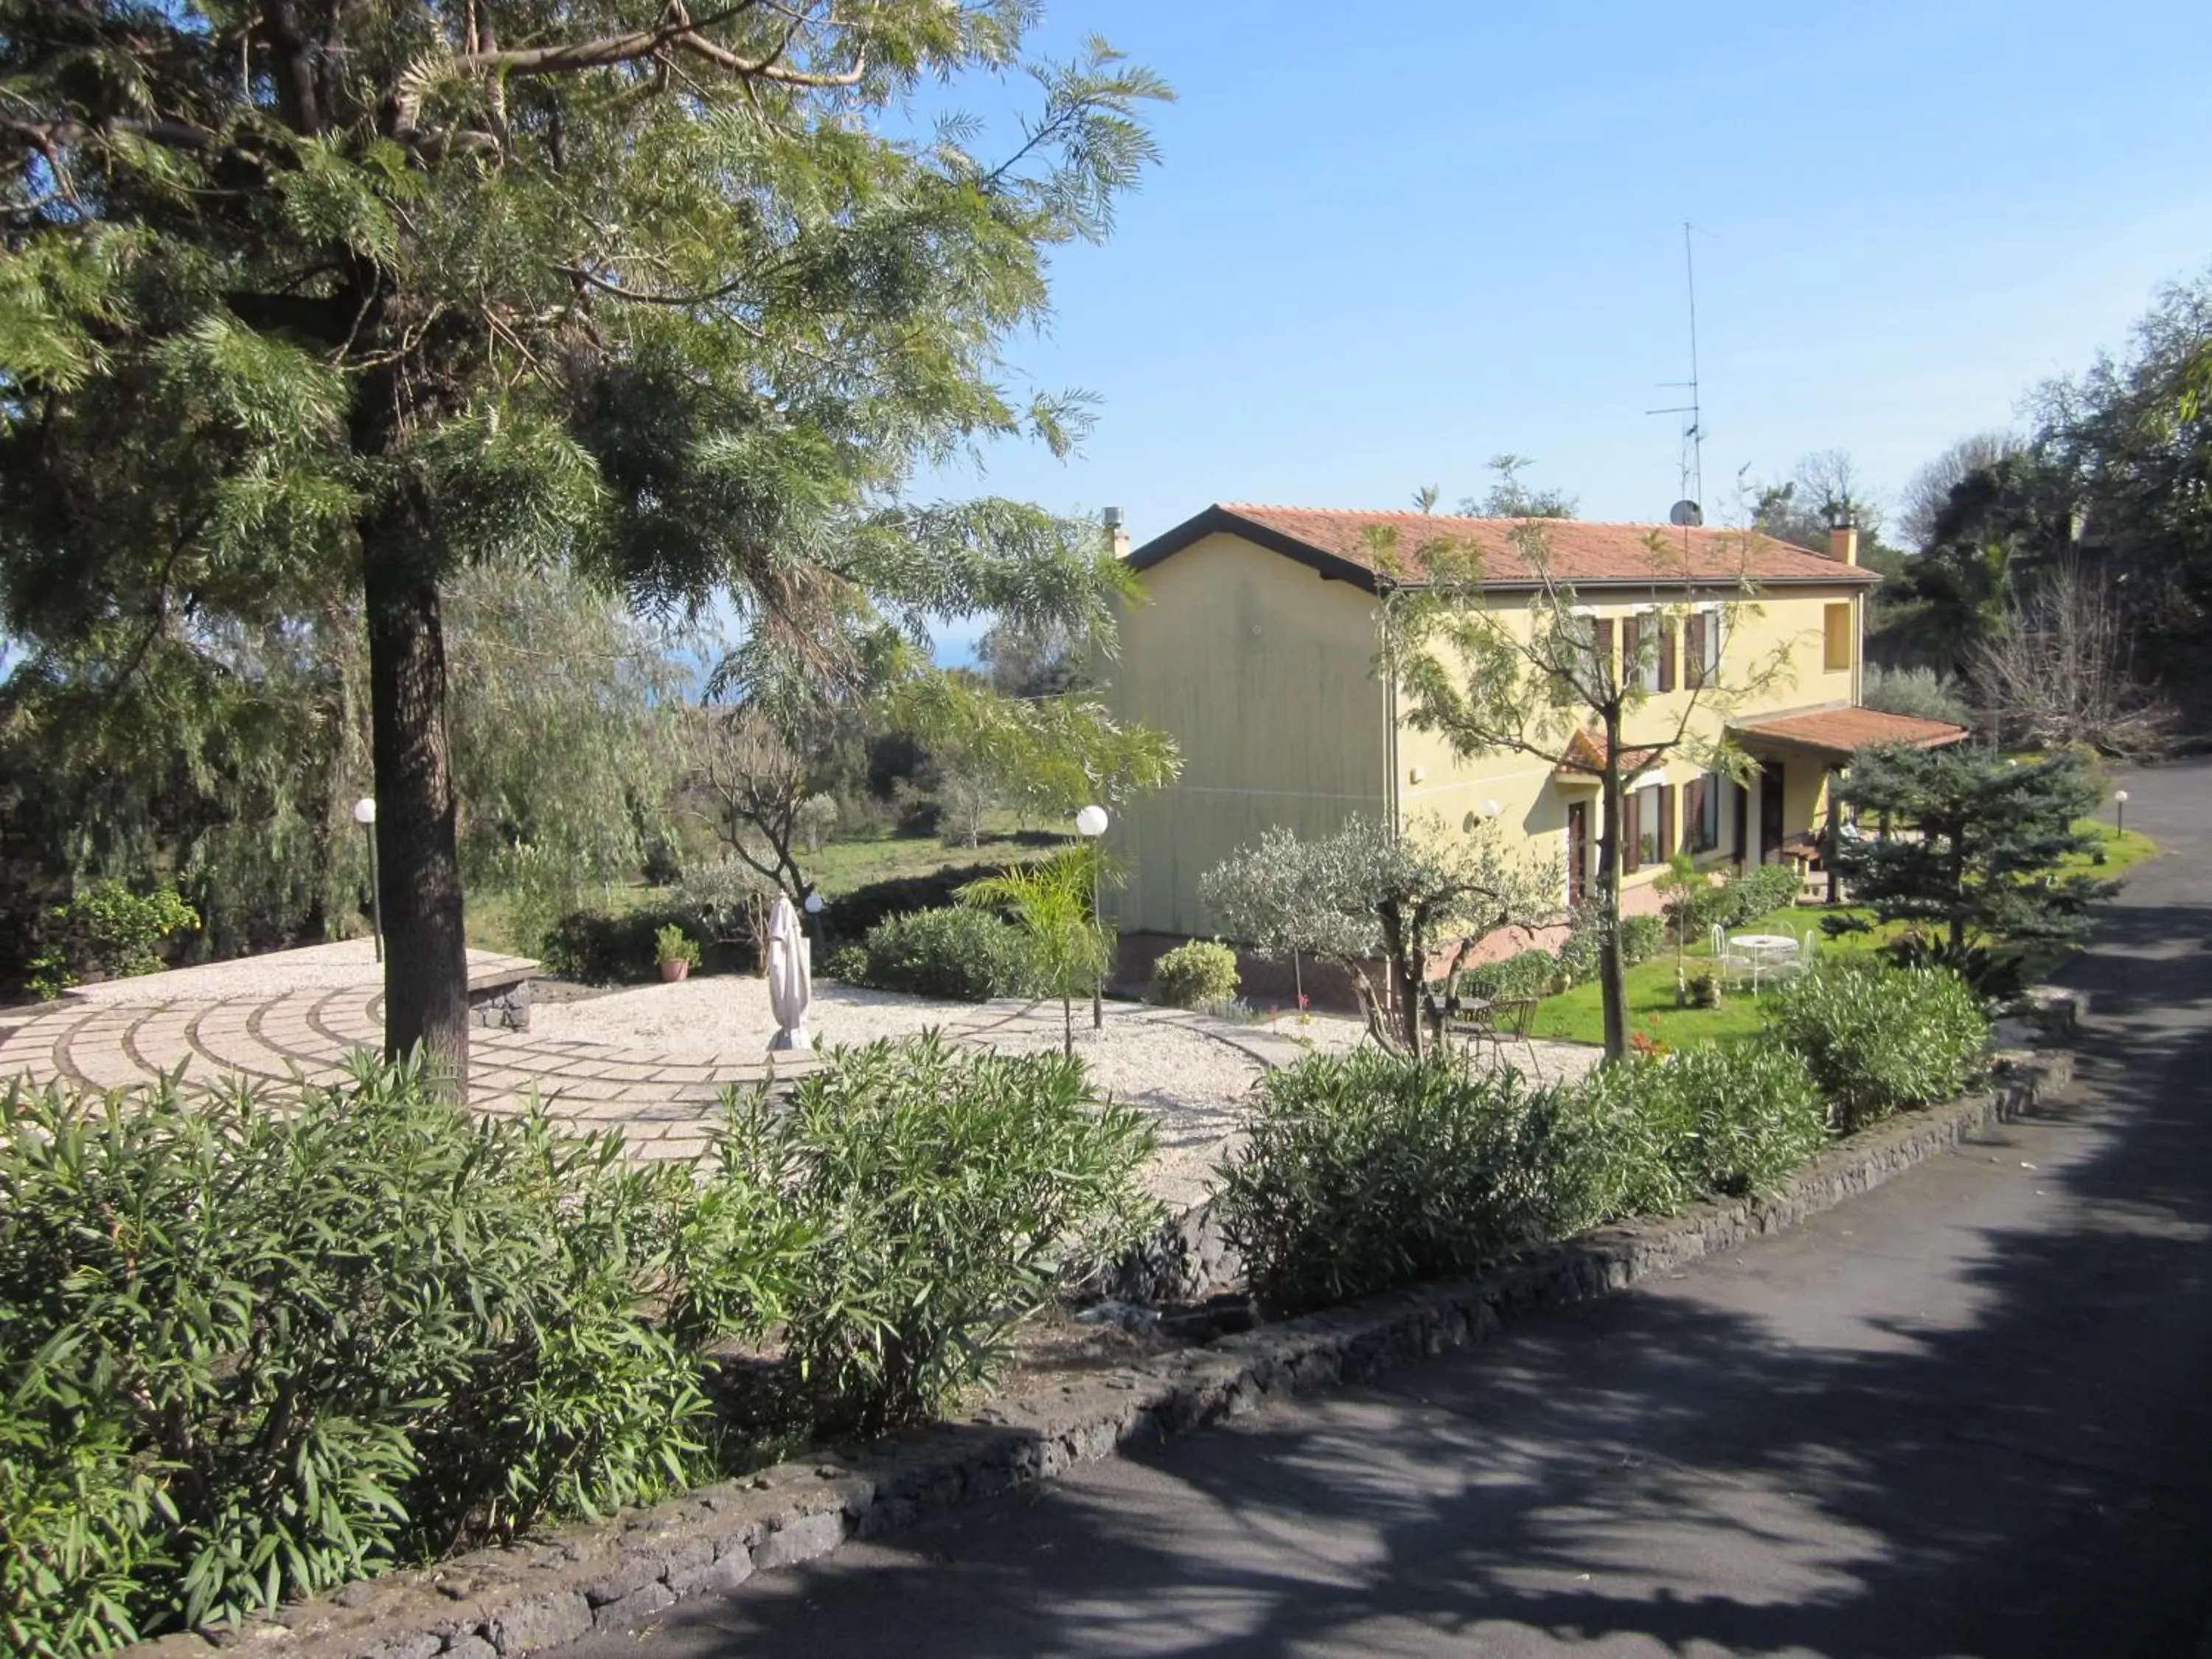 Property Building in B&B BOUTIQUE DI CHARME "ETNA-RELAX-NATURA"